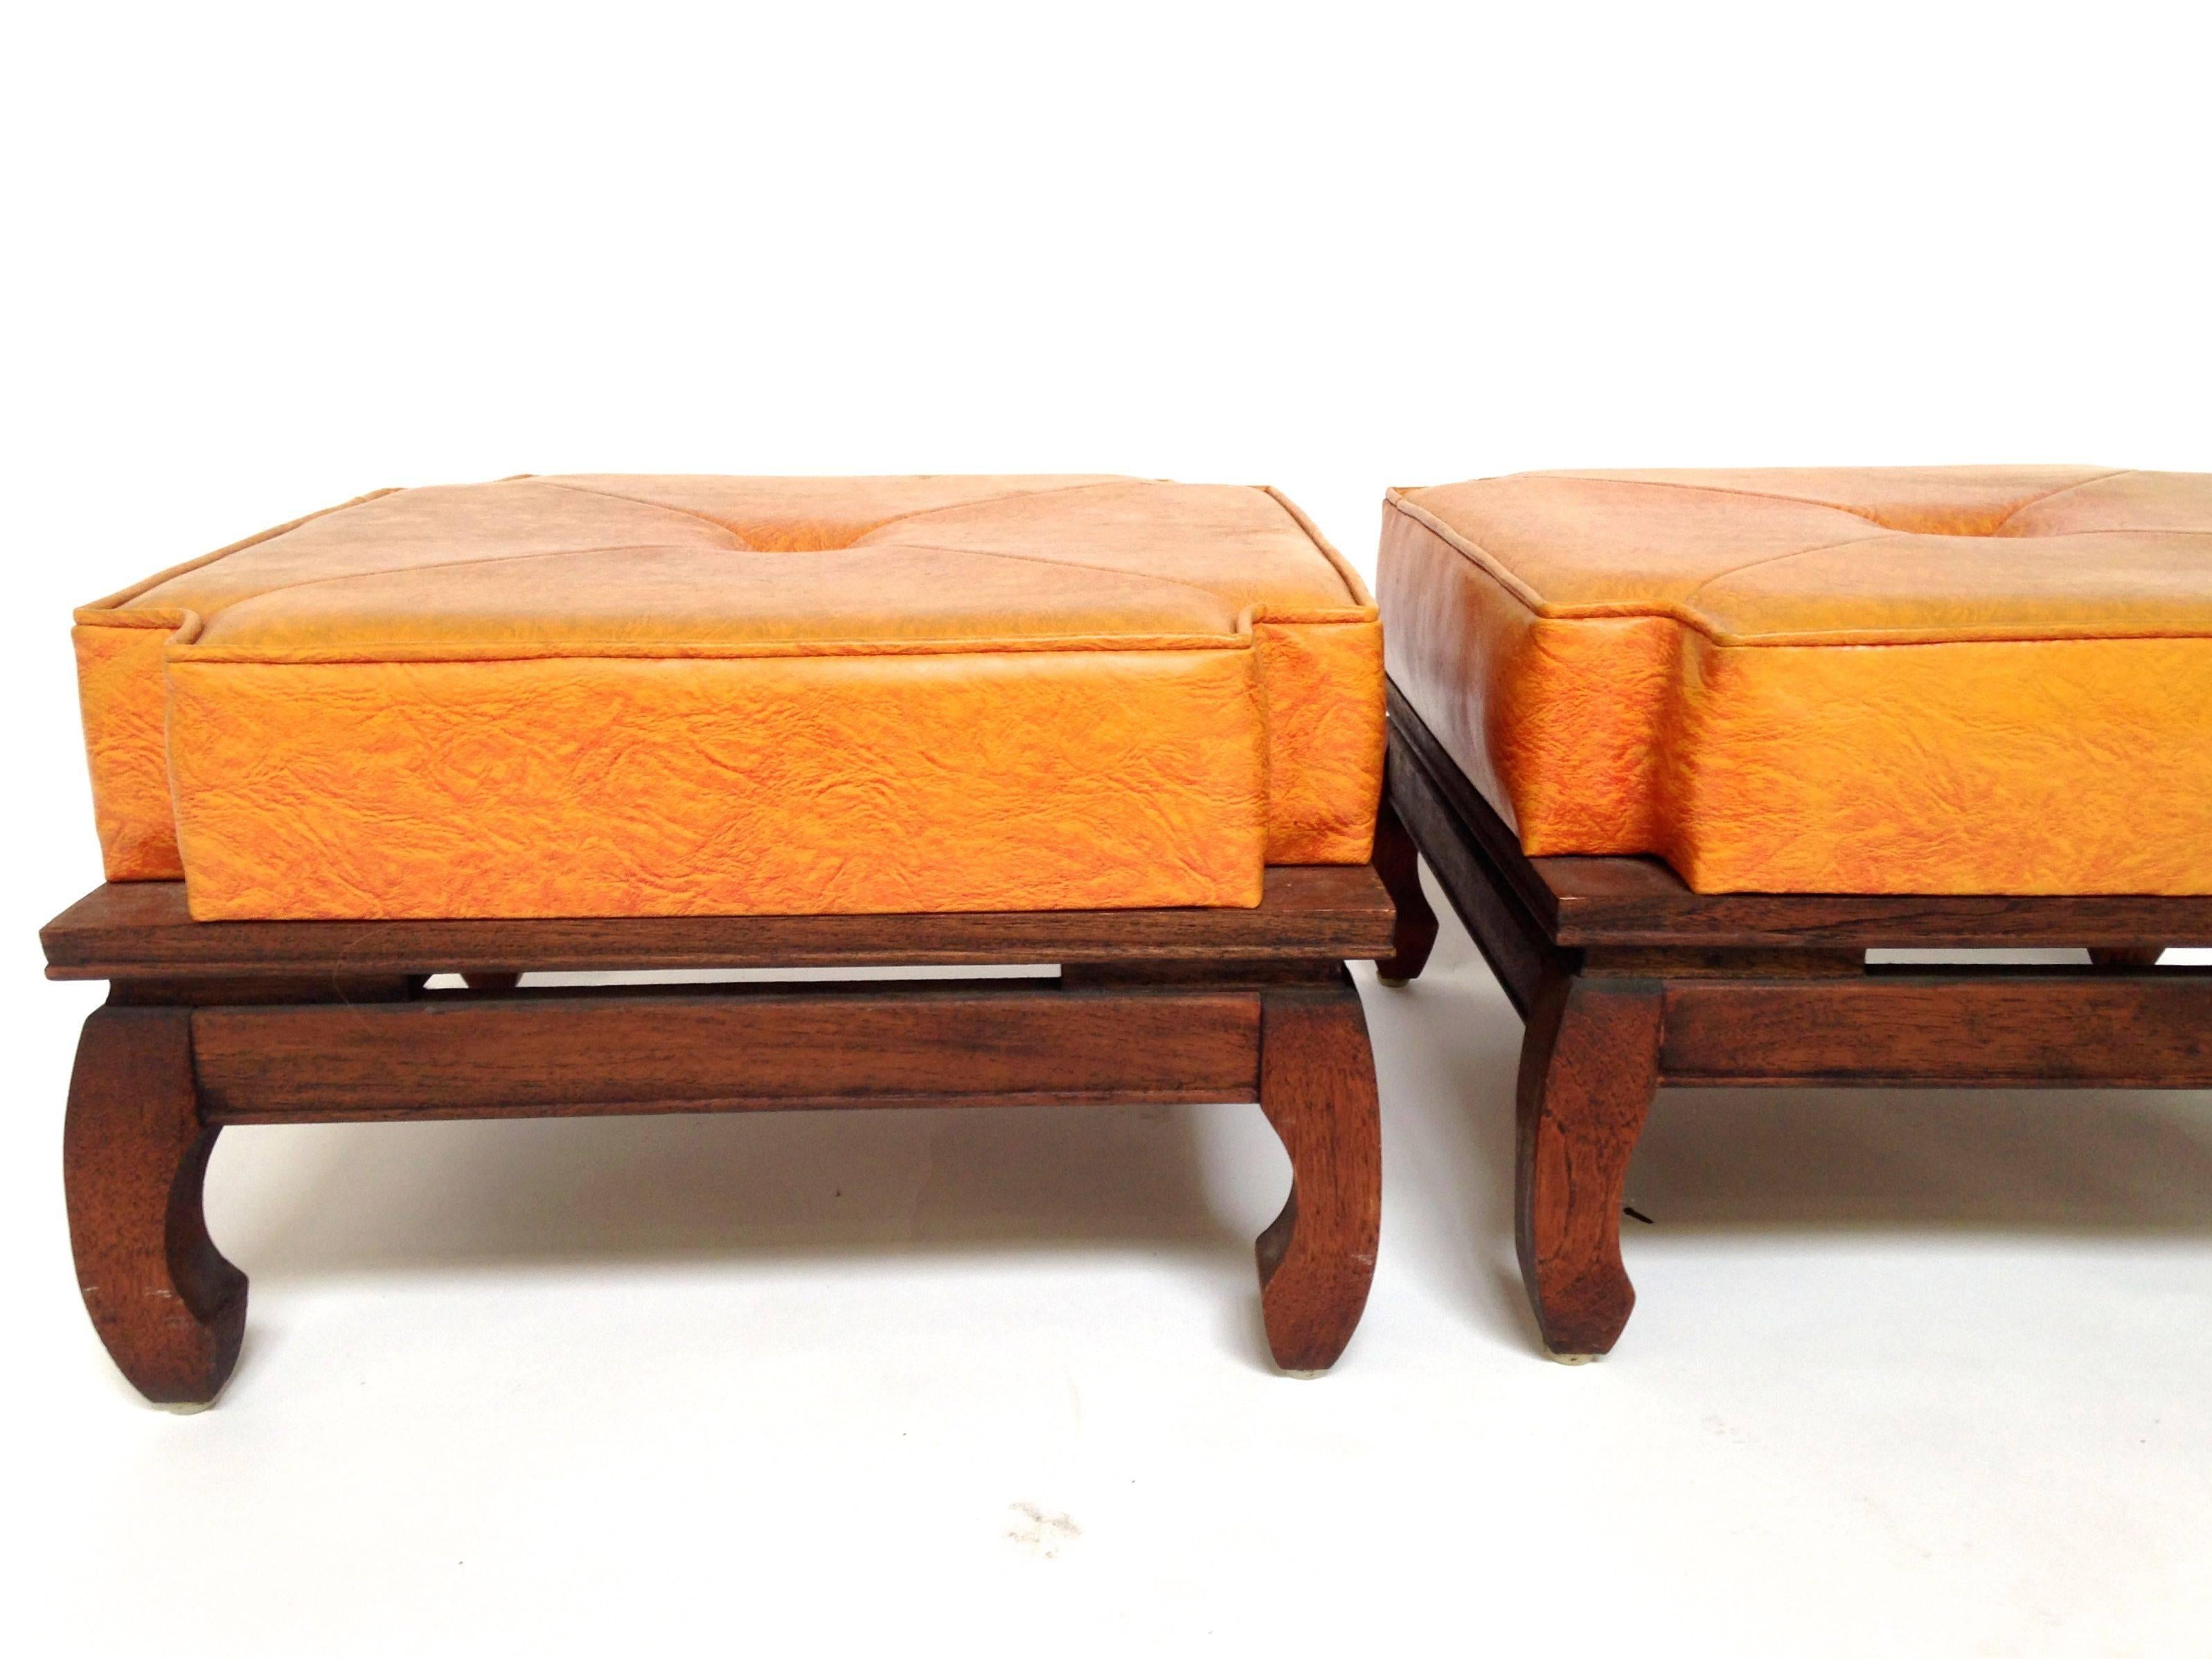 A pair of 1960s, Mid-Century Modern Chinese foot stools by famous designer Ricardo Lynn with a carved base and featuring traditional chow legs and a floating top panel. Orange tufted cushion with lots of padding that sits tall. These have a great